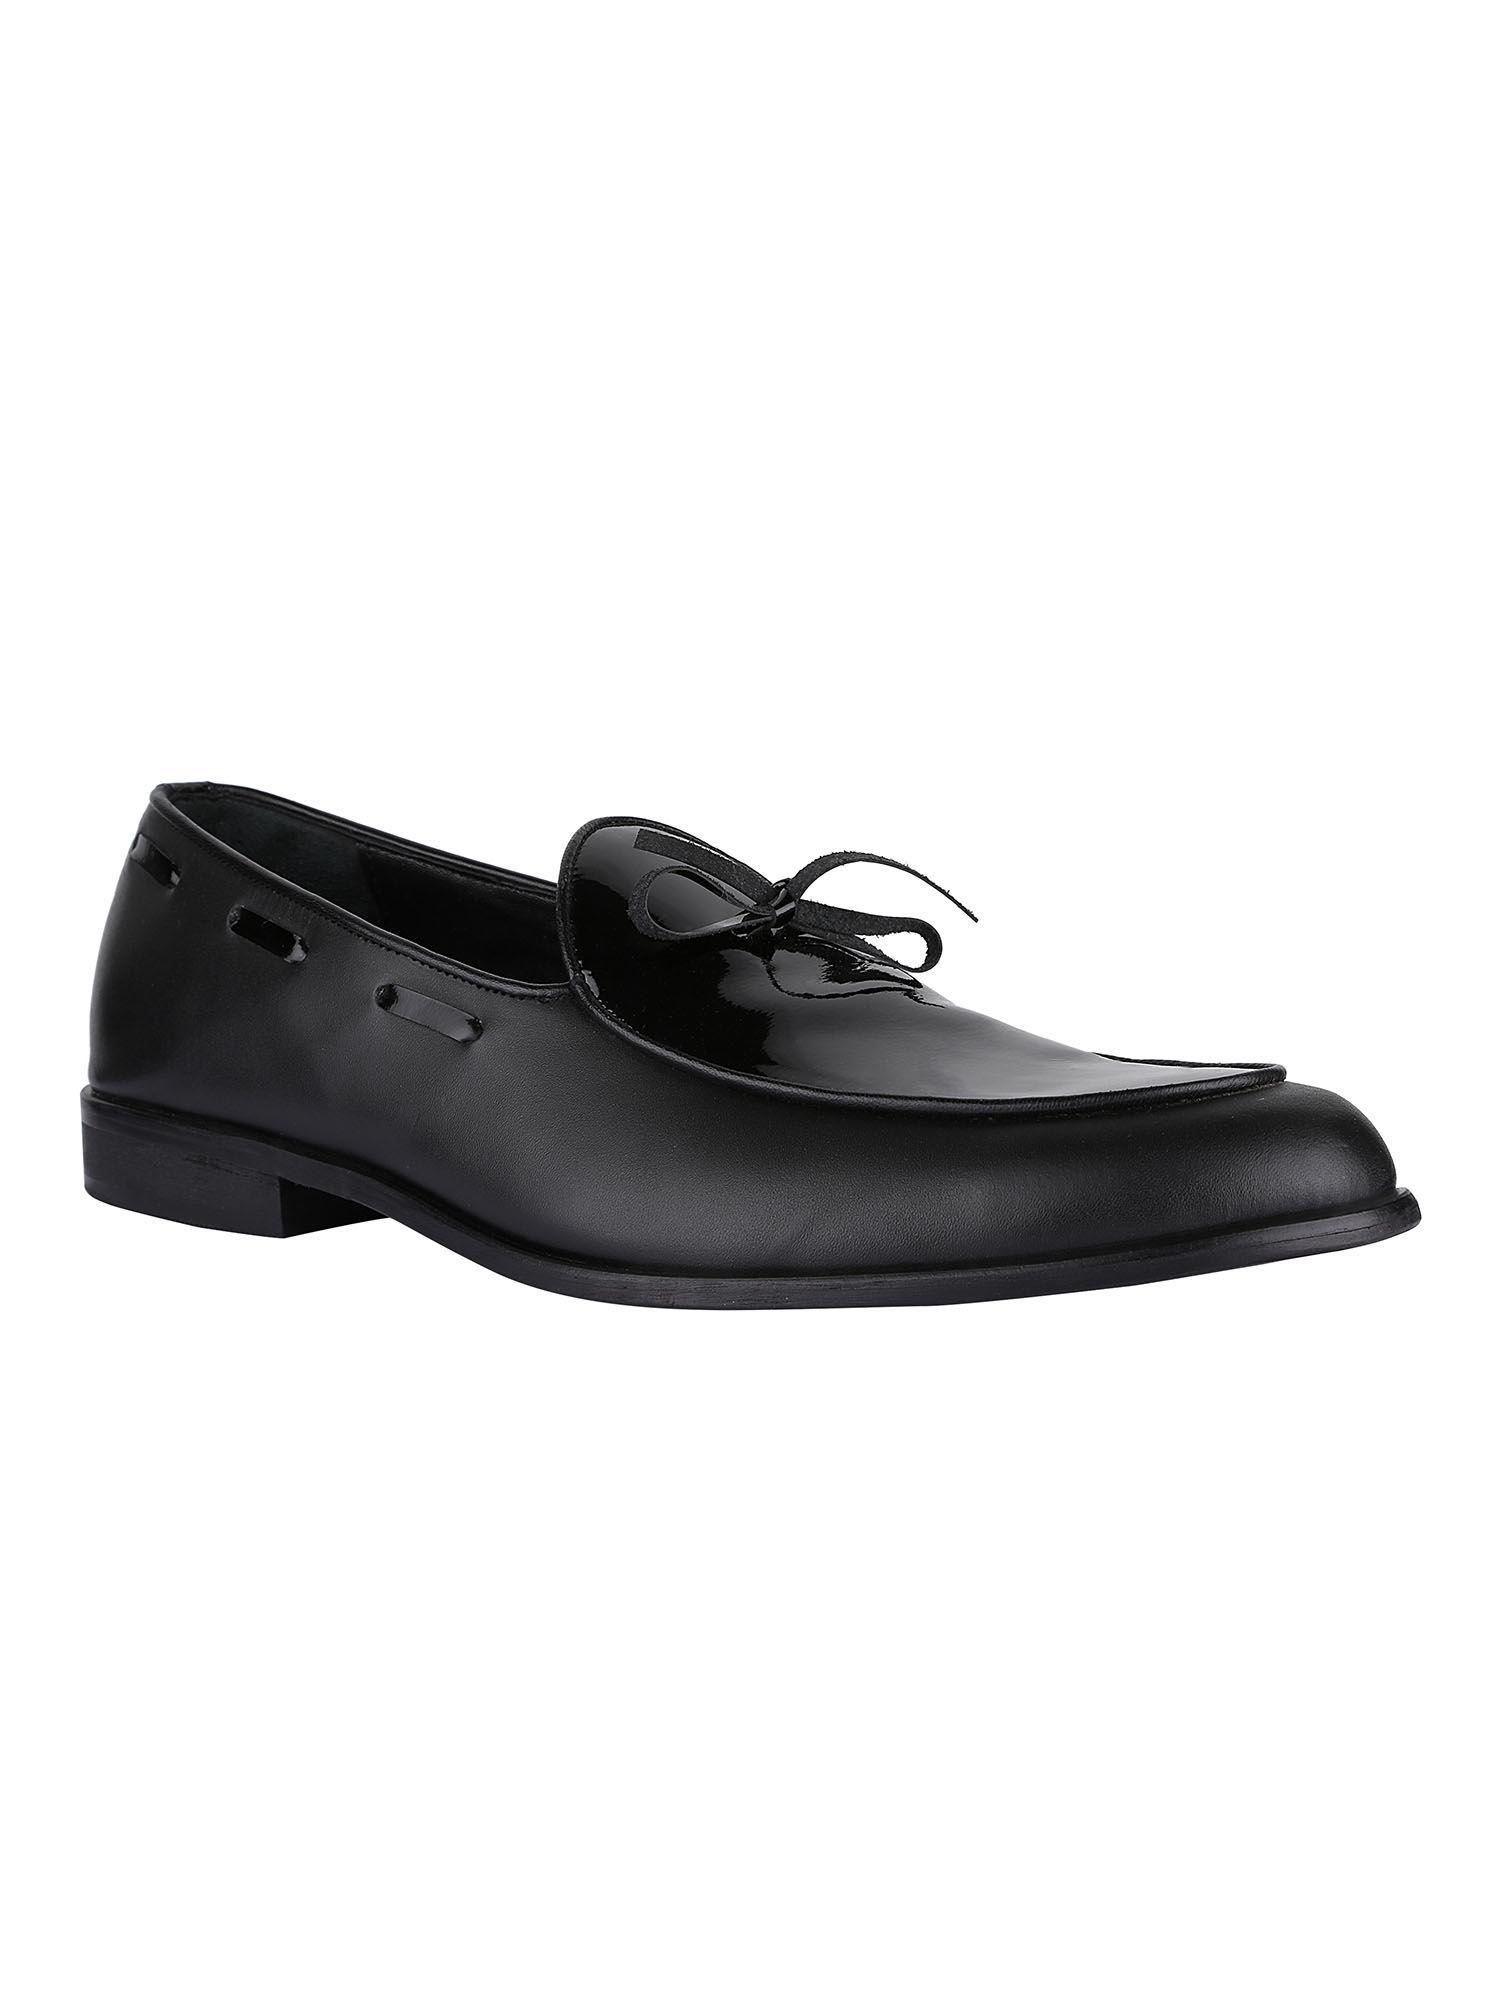 black-patent-loafers-bow